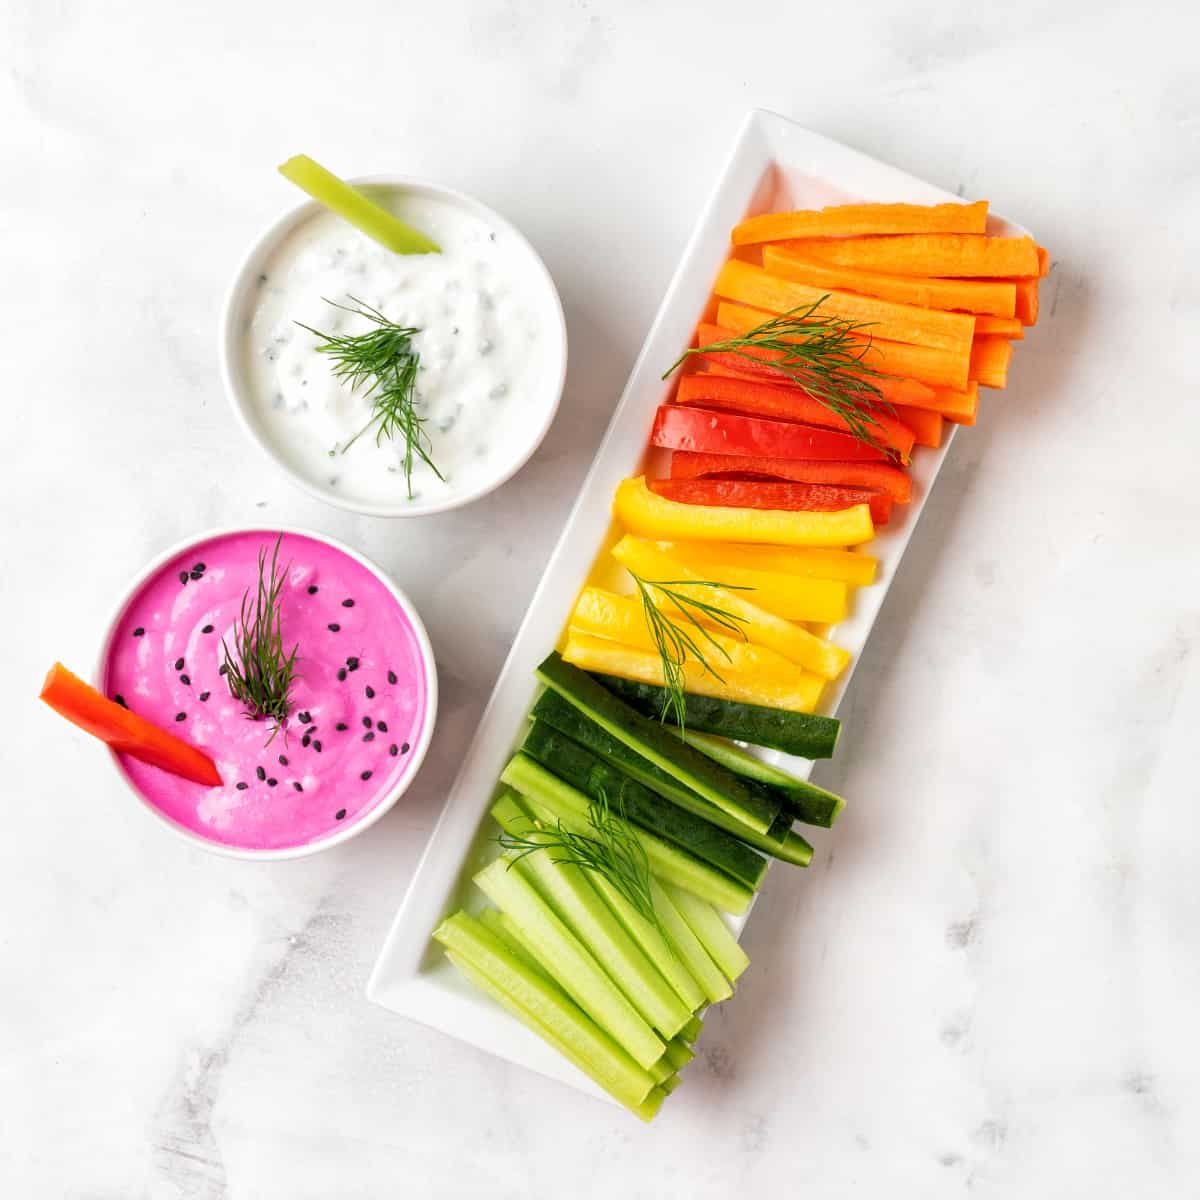 A bowl of yogurt dip with a platter of vegetable batons.